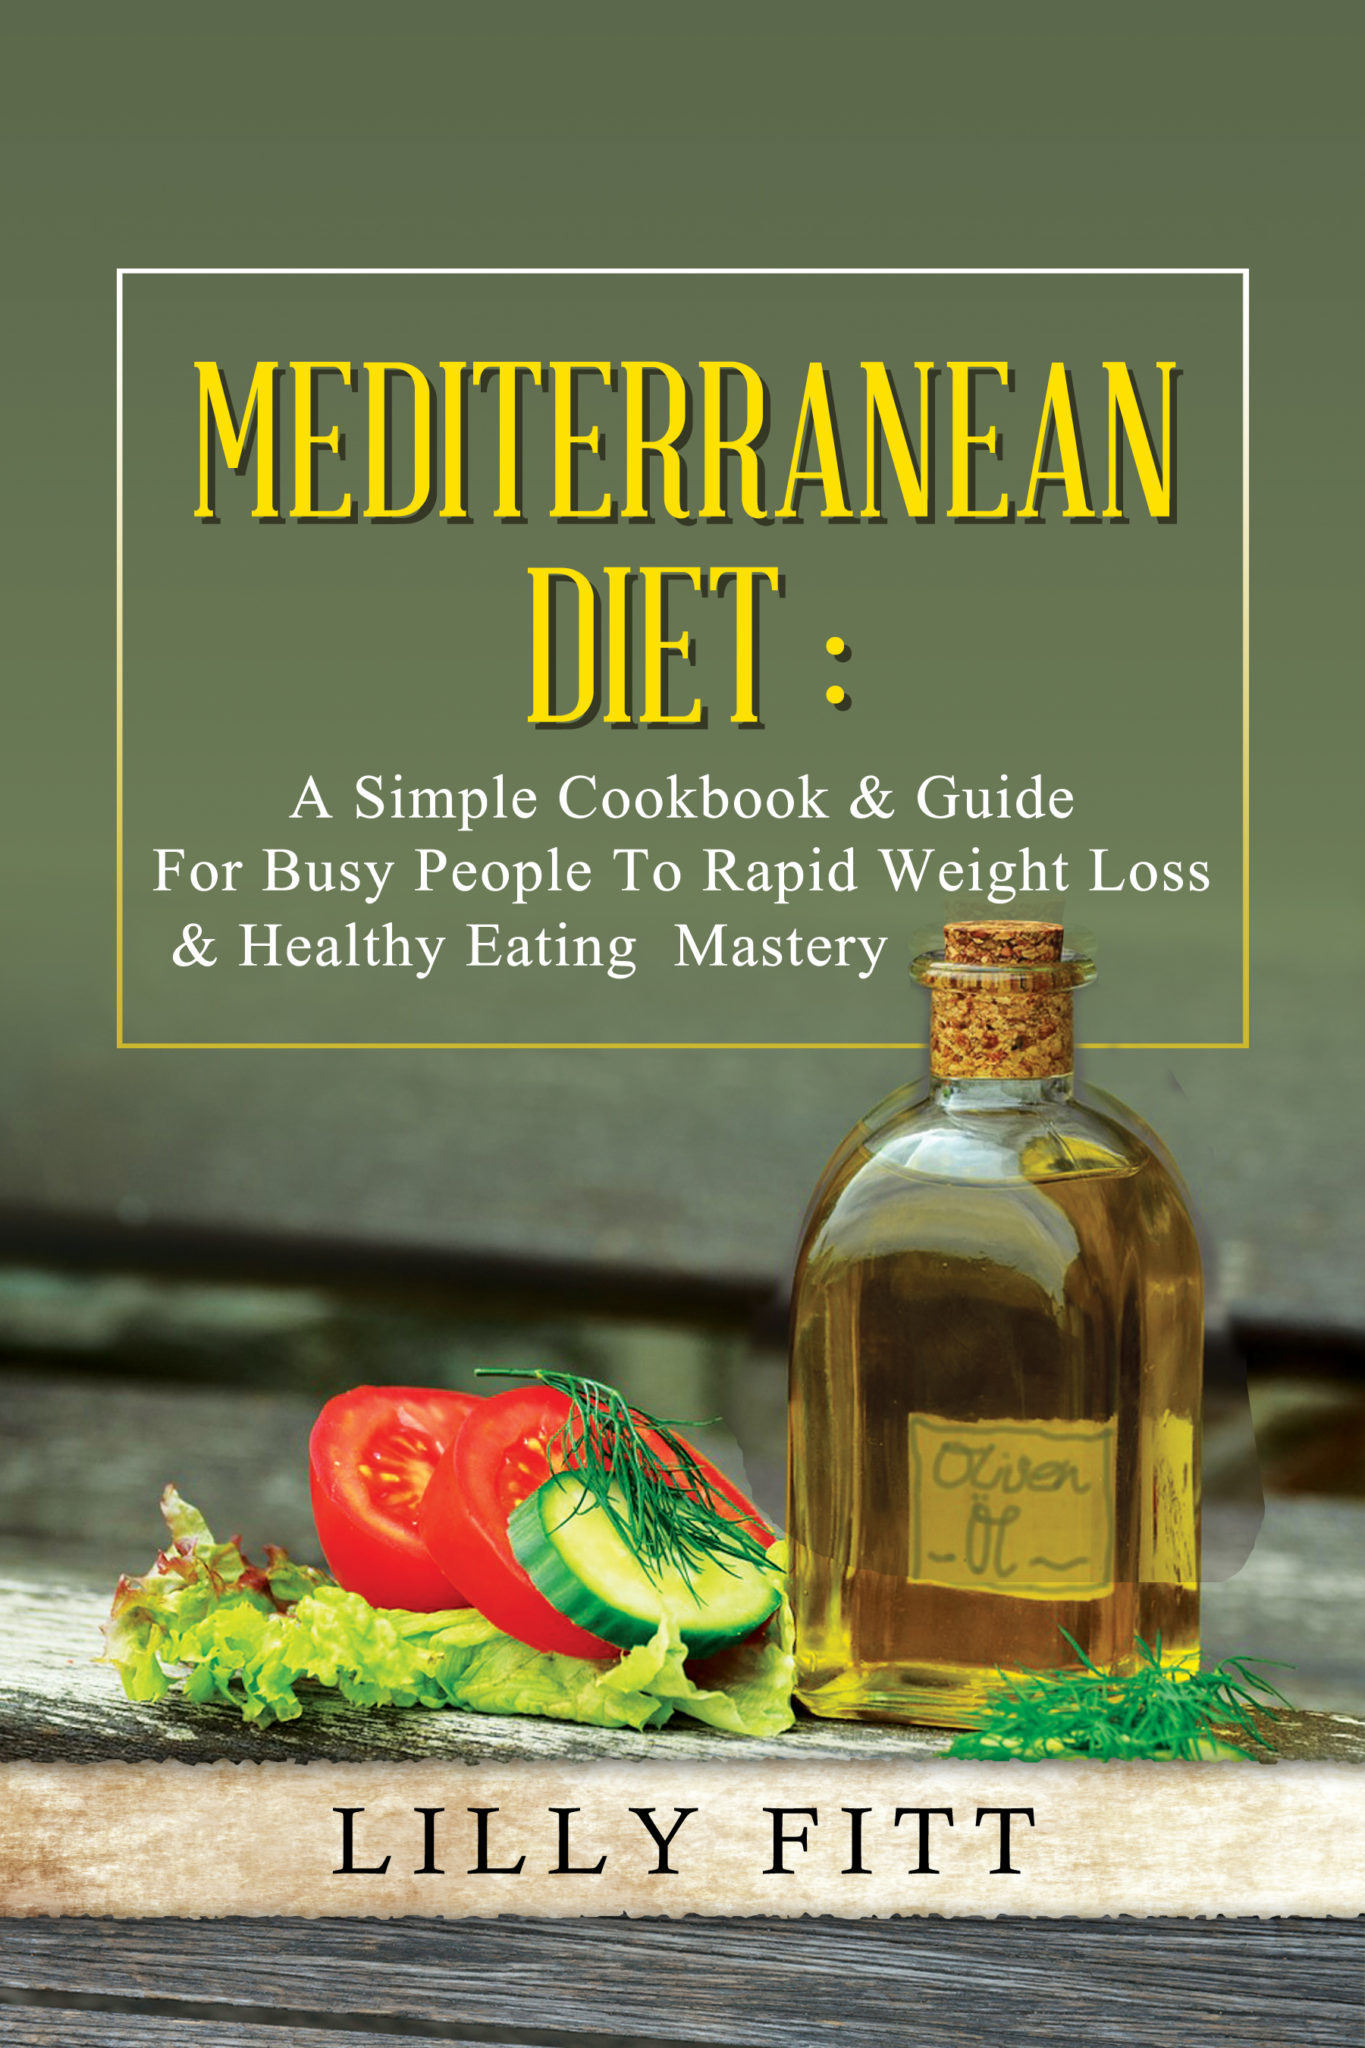 FREE: Mediterranean Diet: A Simple Cookbook & Guide For Busy People To Rapid Weight Loss & Healthy Eating Mastery by Lilly Fitt